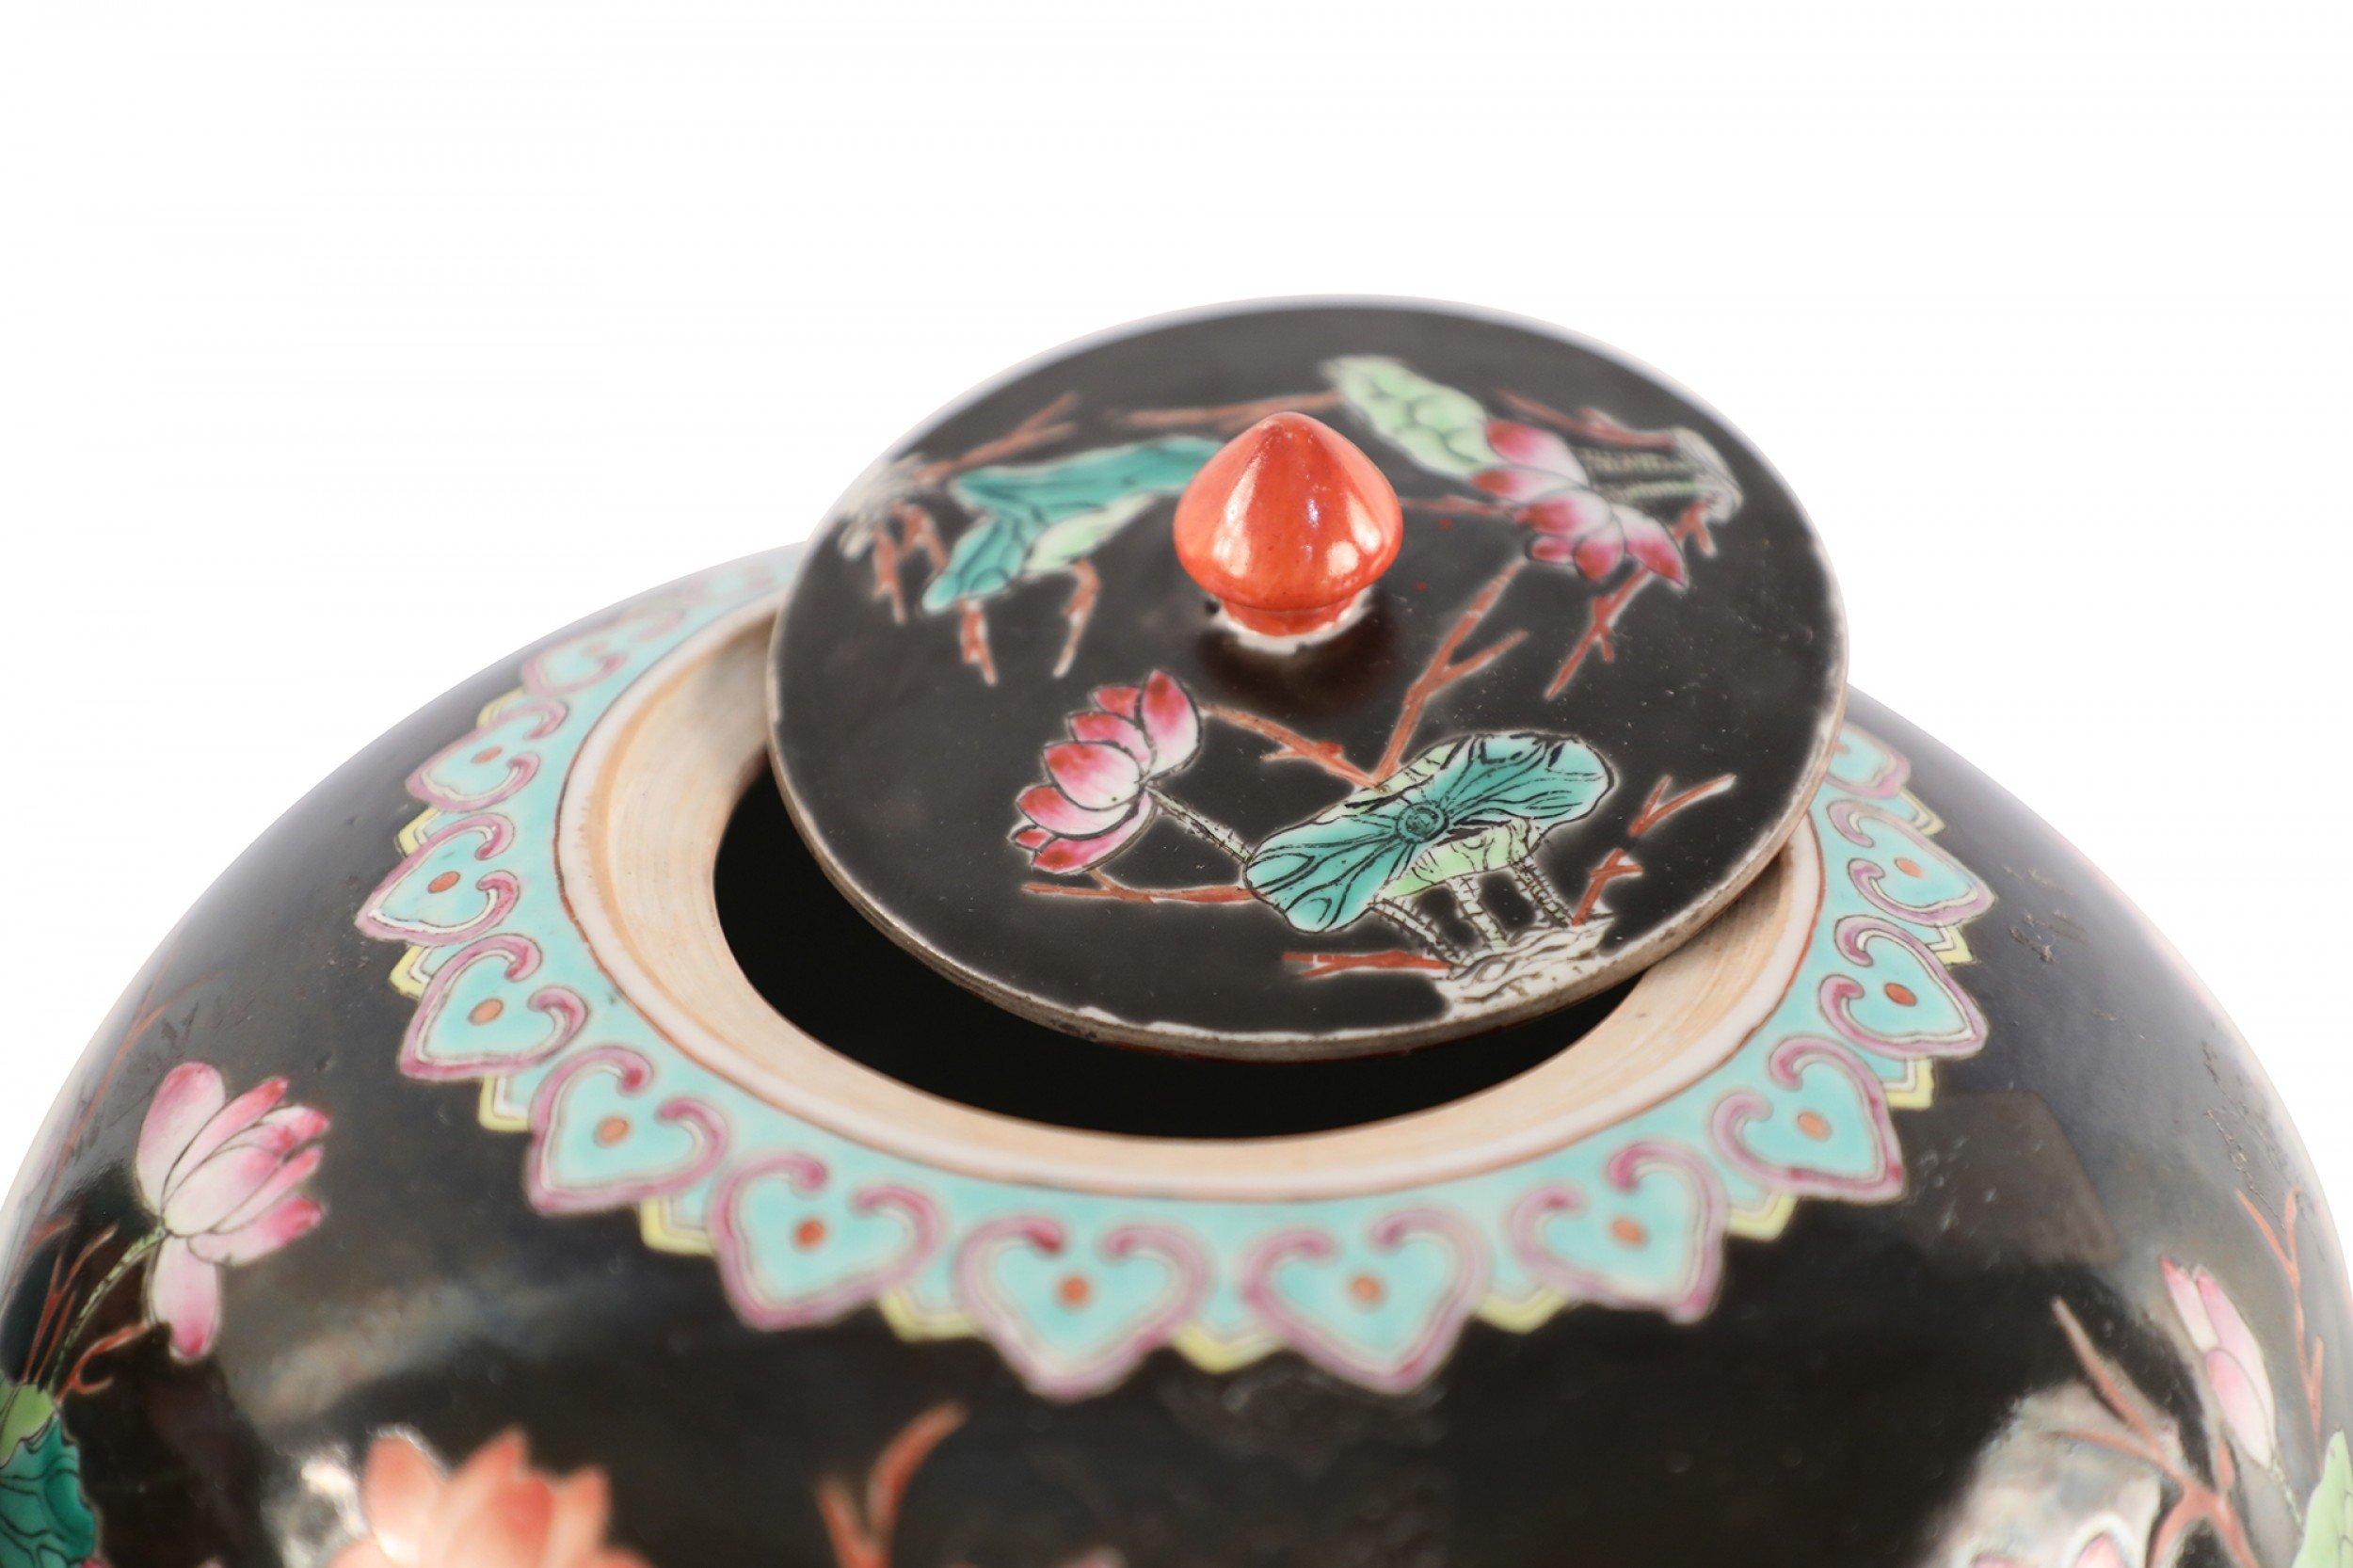 4 Chinese similar black porcelain vases painted with natural scenes depicting ducks amid florals and lily pads and geometric patterned bands at the tops and bases with finial-topped lids (vases vary slightly in size, shape and pattern) (PRICED